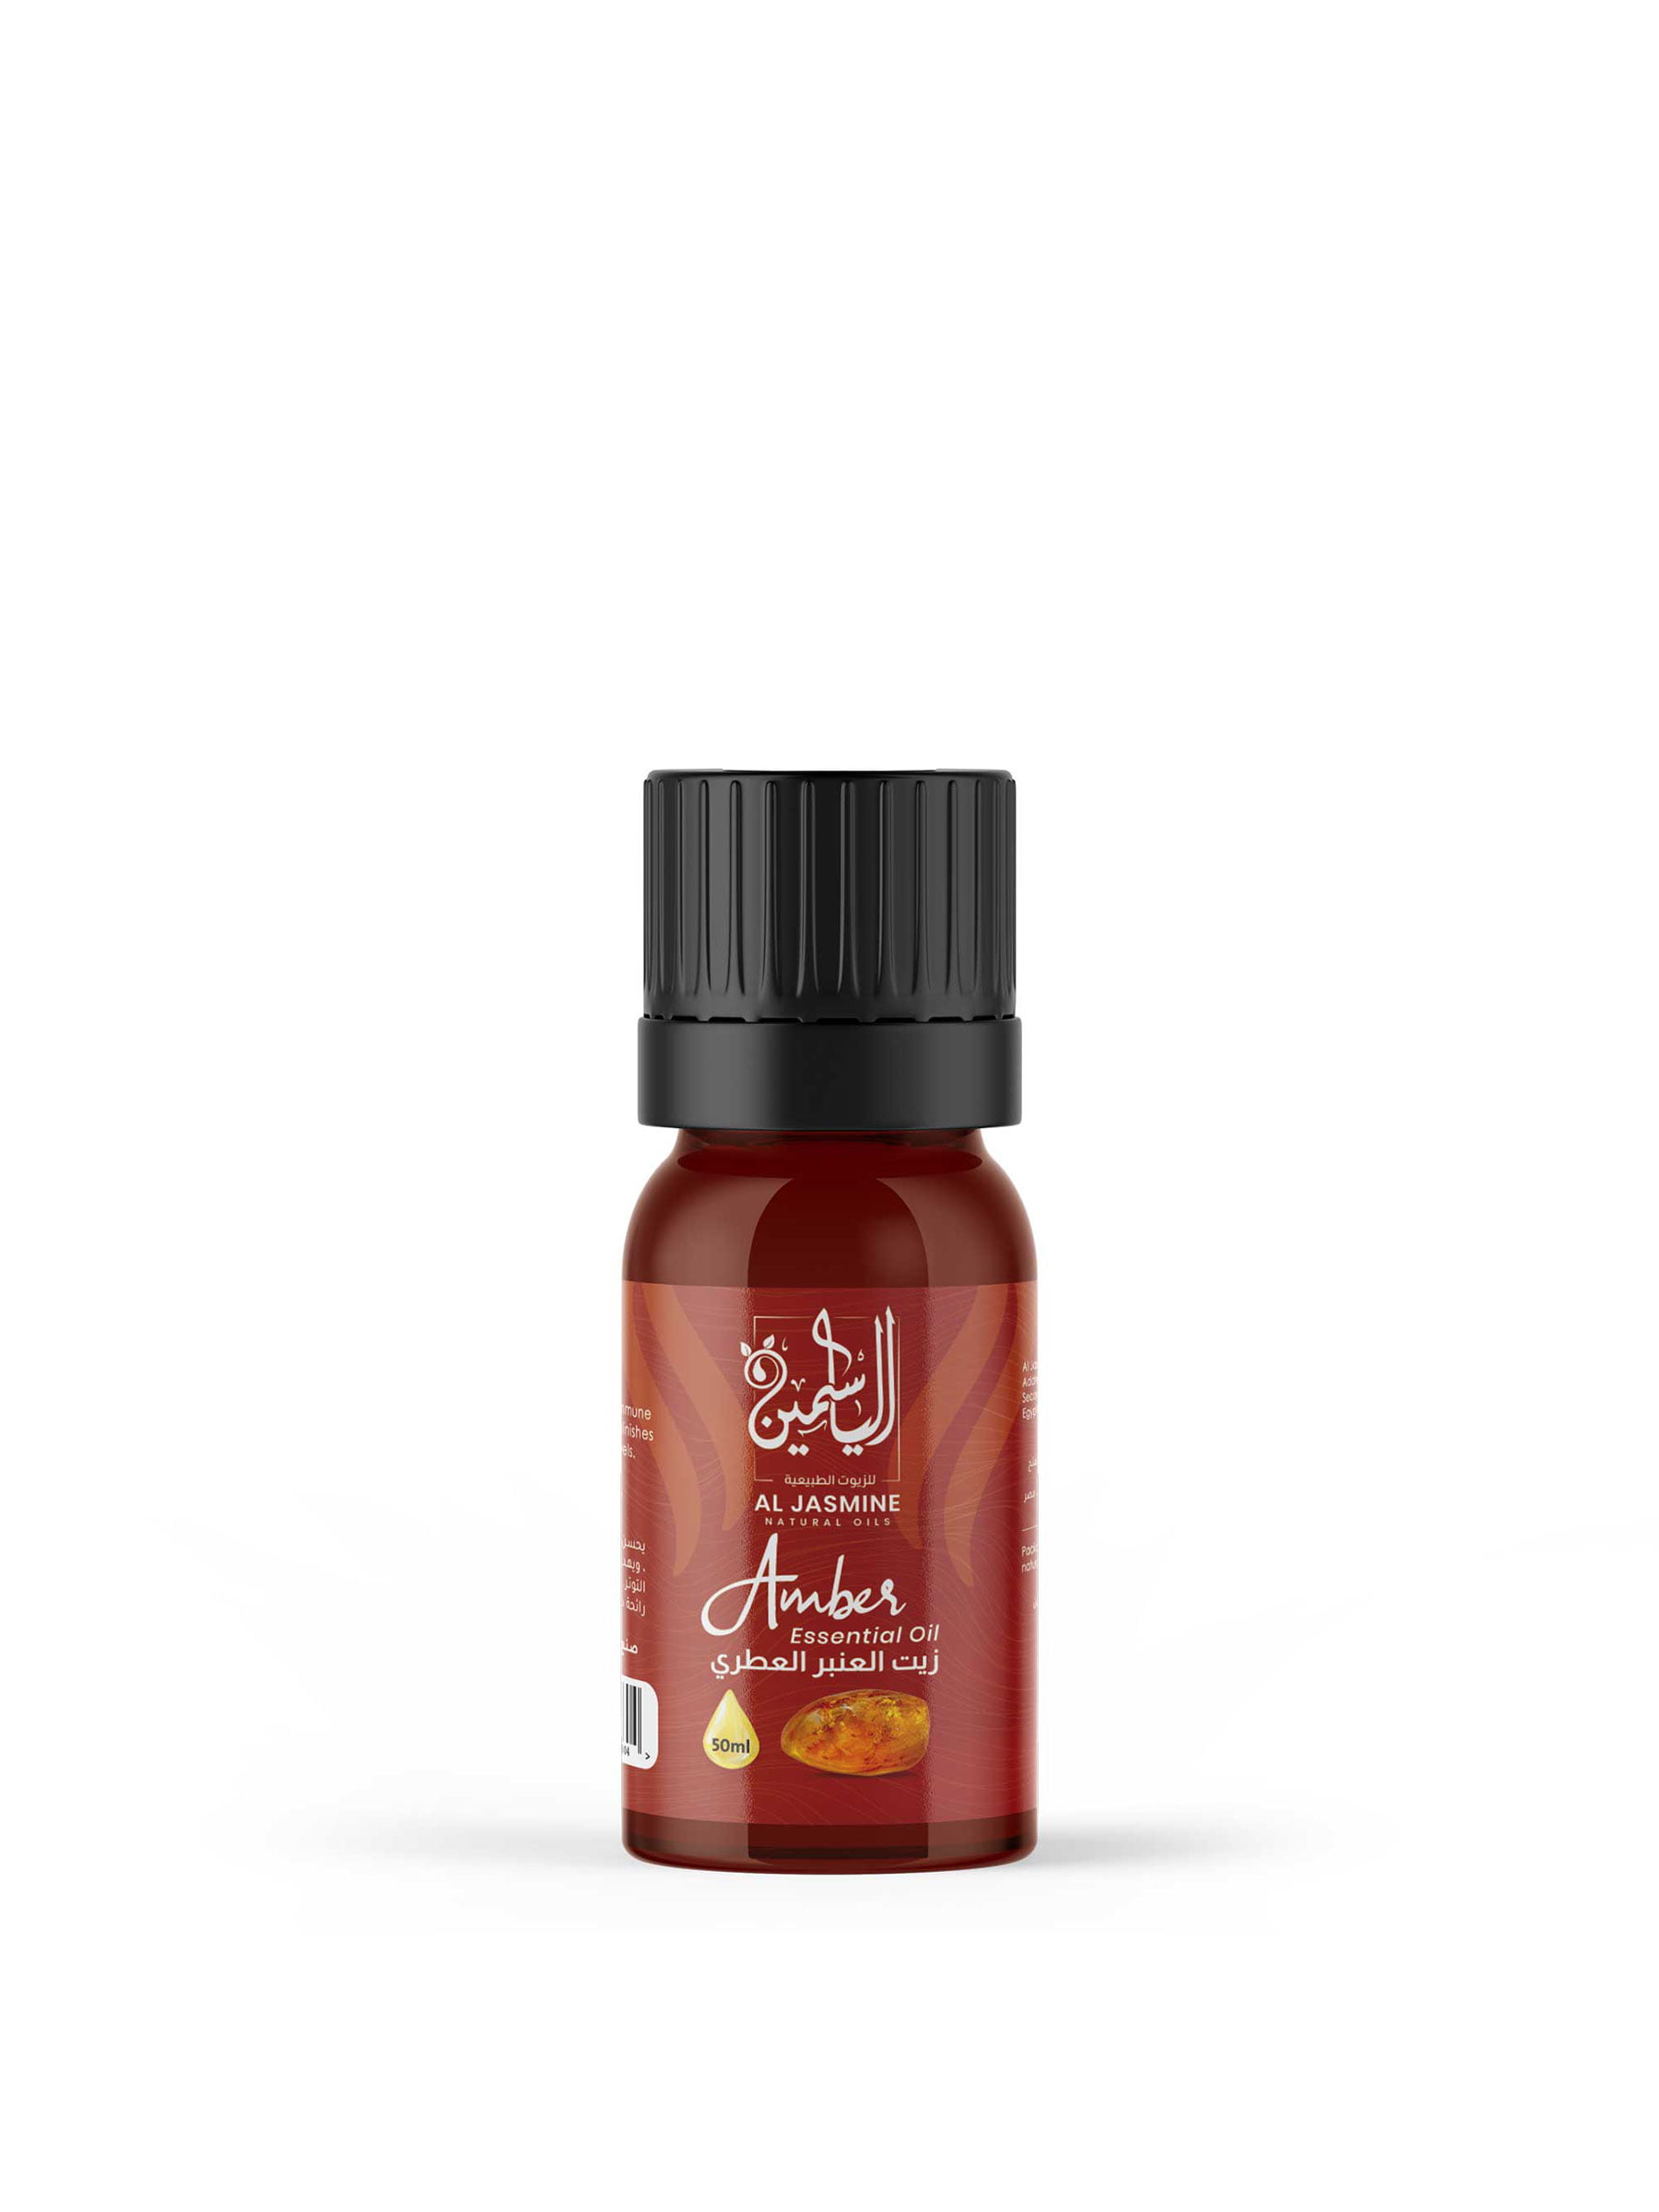 Buy Pure Amber Essential Oil Online at Cheap Price – Incense Pro